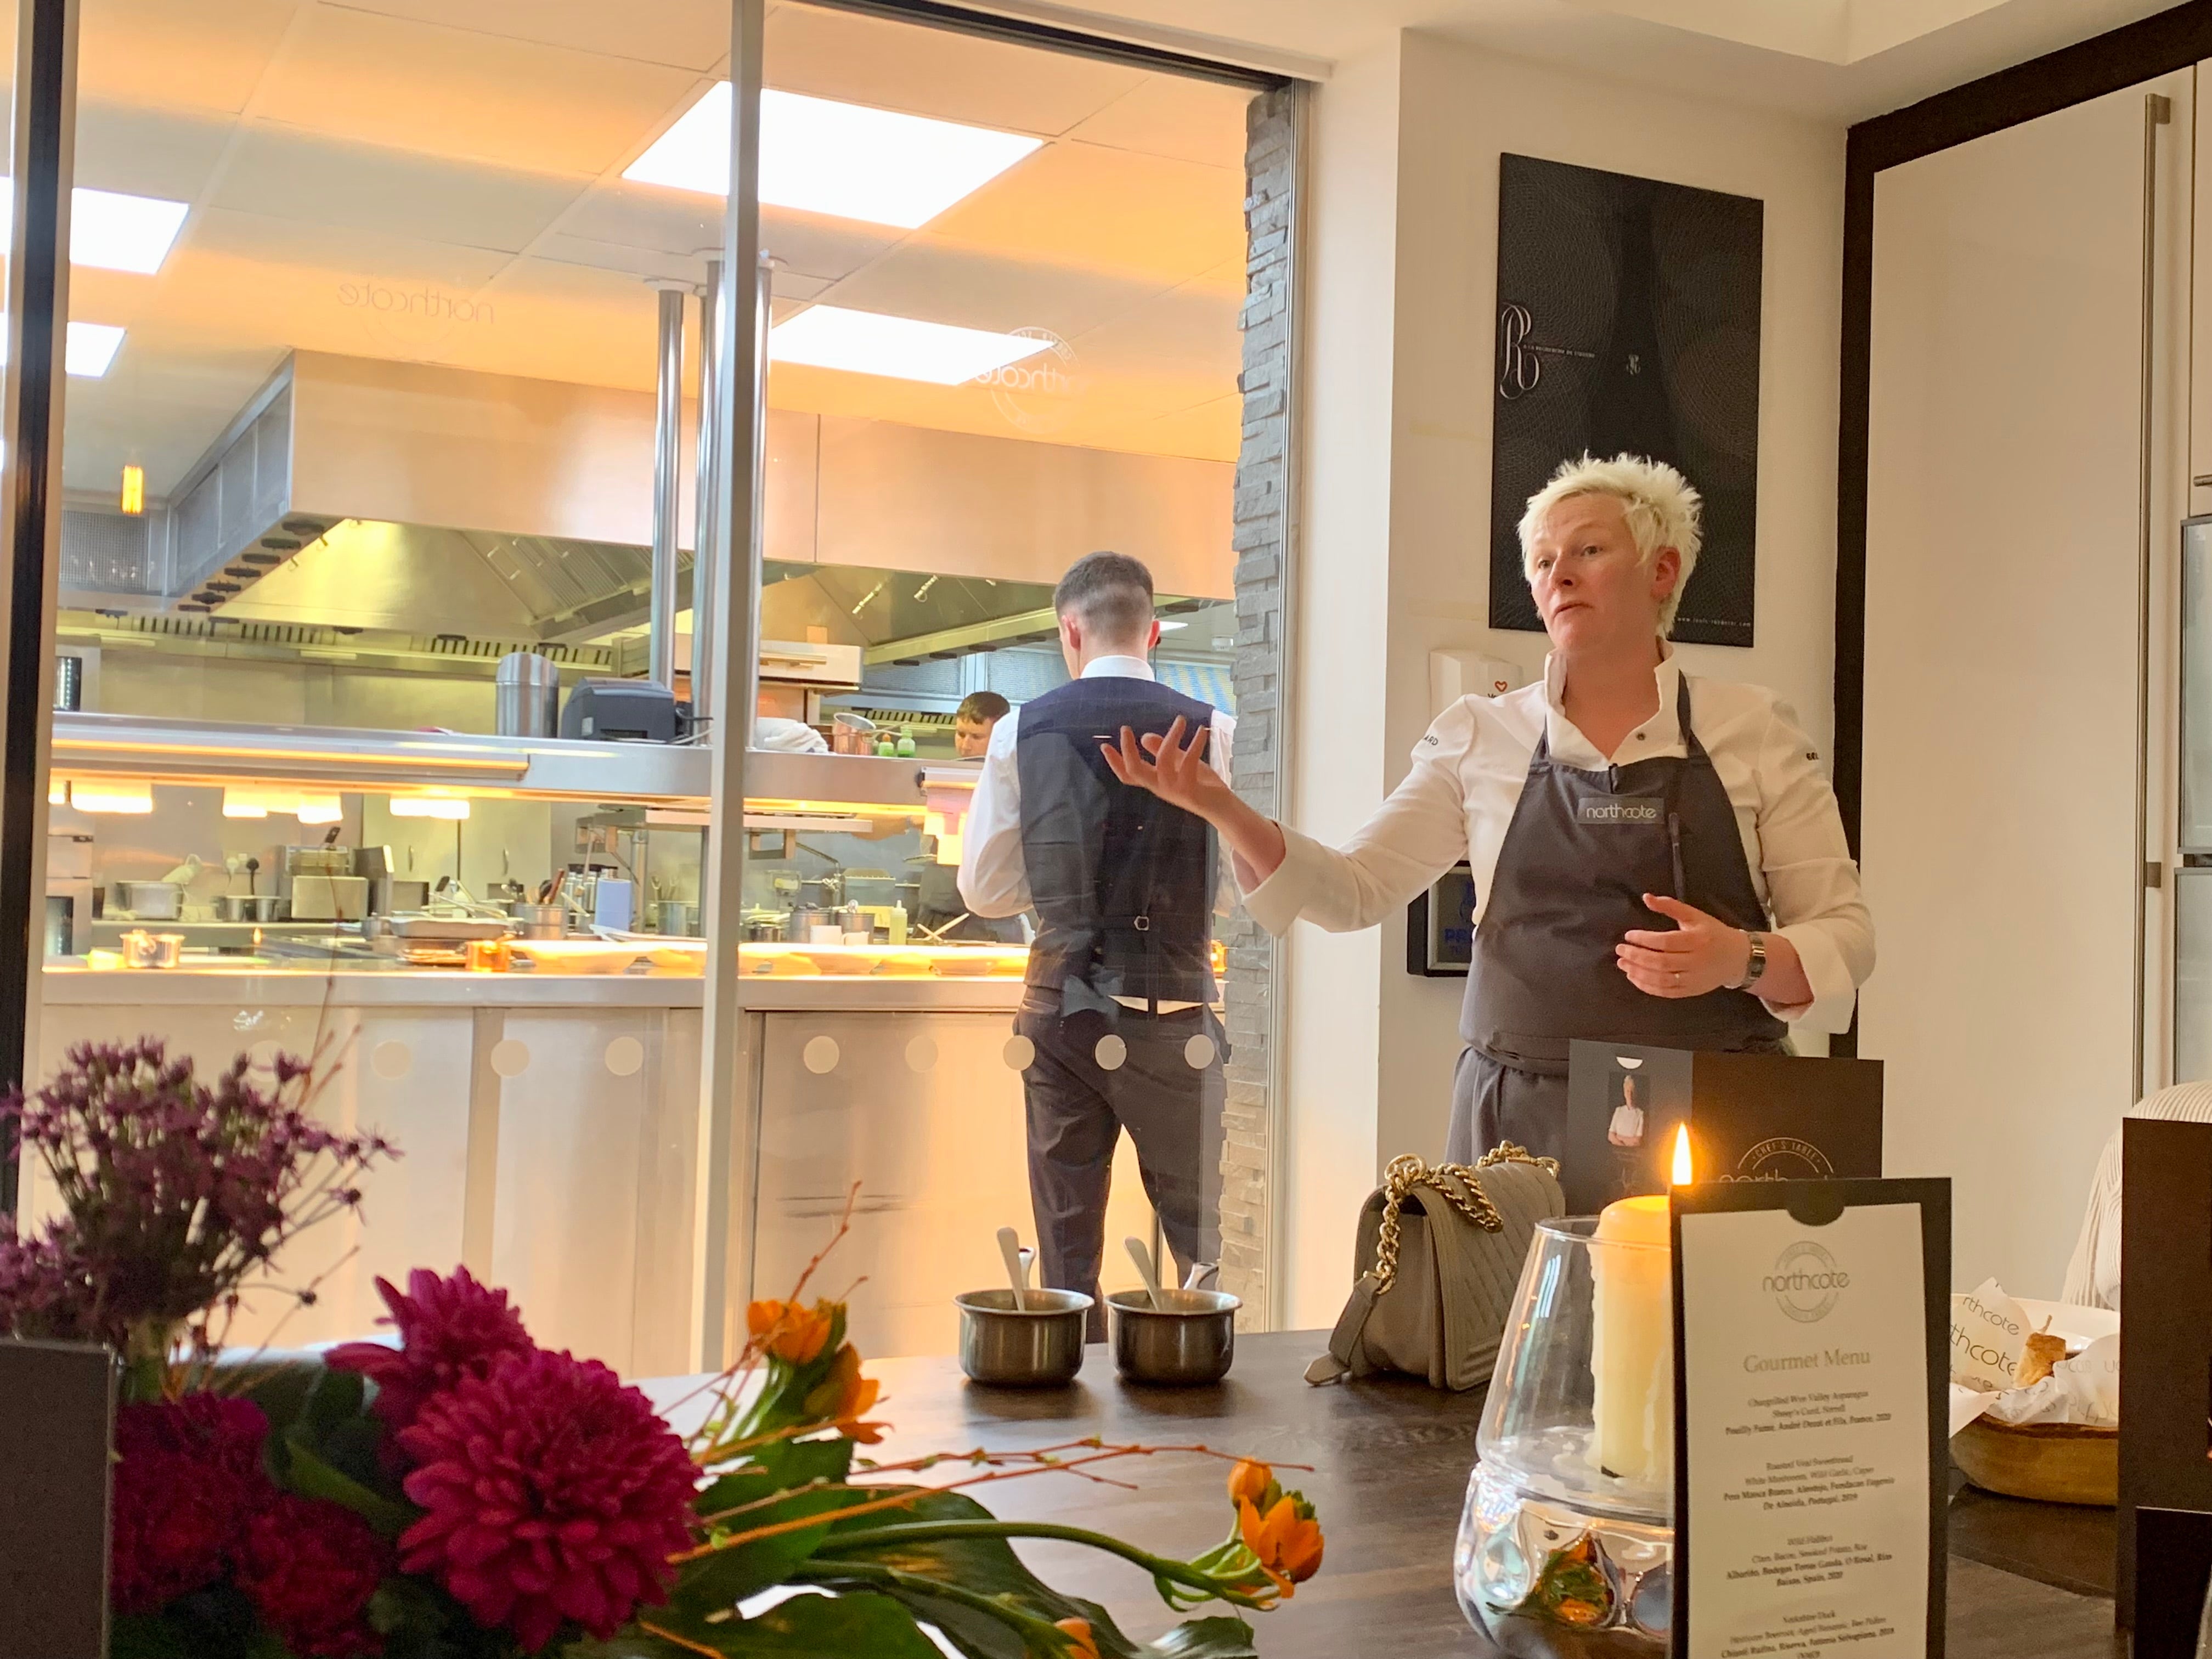 Northcote's executive chef Lisa Goodwin-Allen visits all of her suppliers personally, ensuring they share her dedication to sustainability